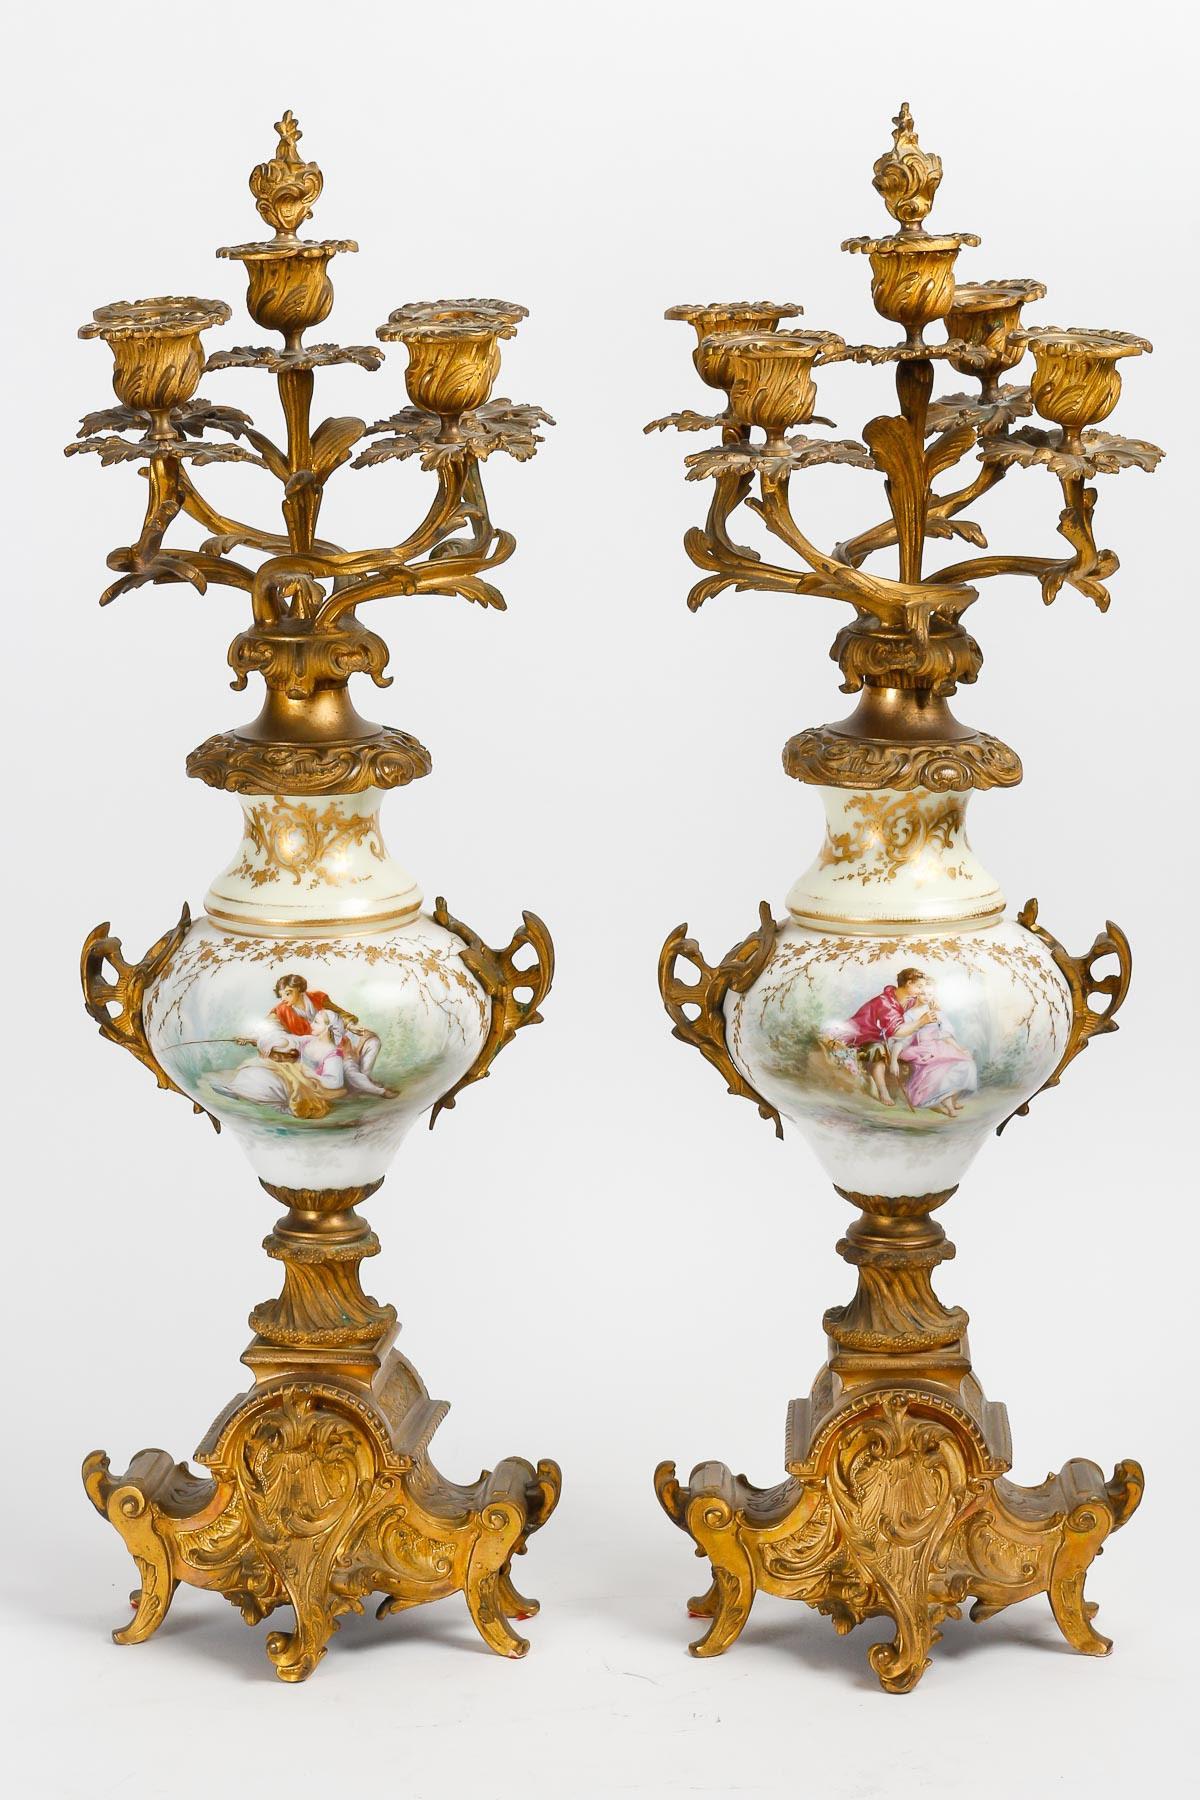 19th century Sèvres porcelain mantel set.

Original Sèvres porcelain and gilt bronze mantelpiece from the 19th century, consisting of a clock and its two candelabras. Allow for the clock movement to be restarted.
Clock: h: 54cm, w: 30cm, d: